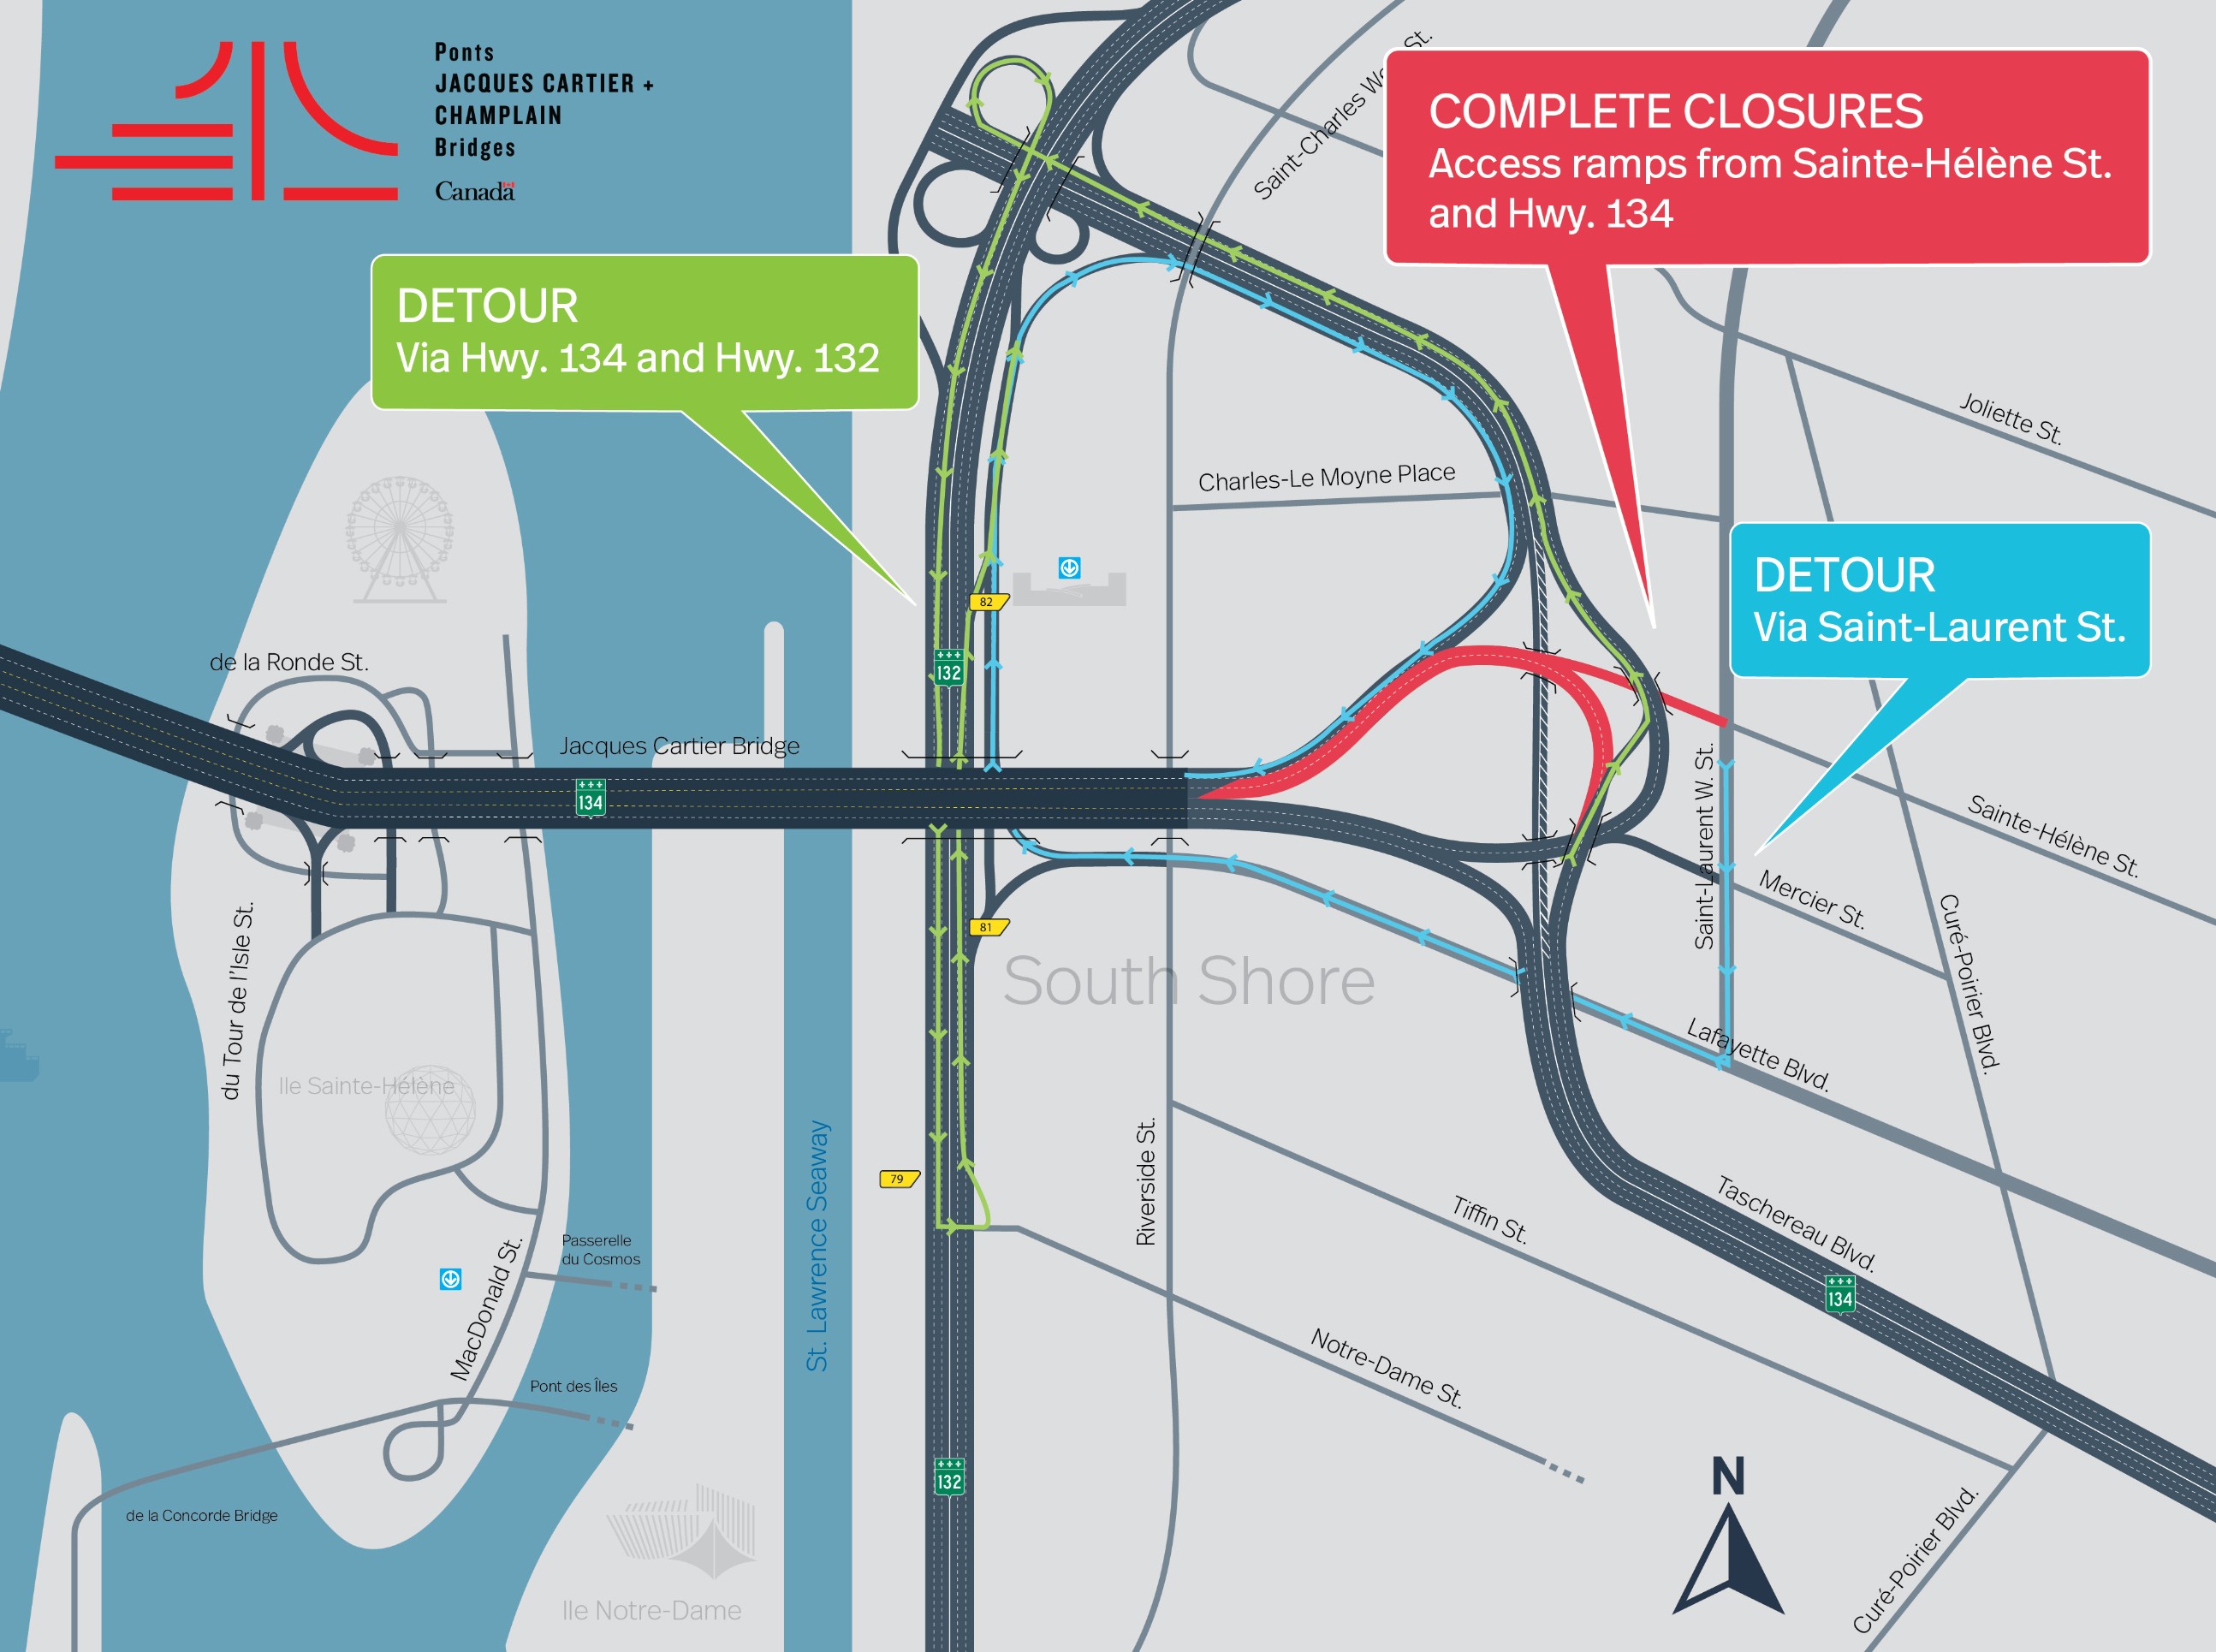 Jacques-Cartier Bridge | Complete night closure of several access ramps to the Jacques Cartier Bridge toward Montréal on May 20 and 21